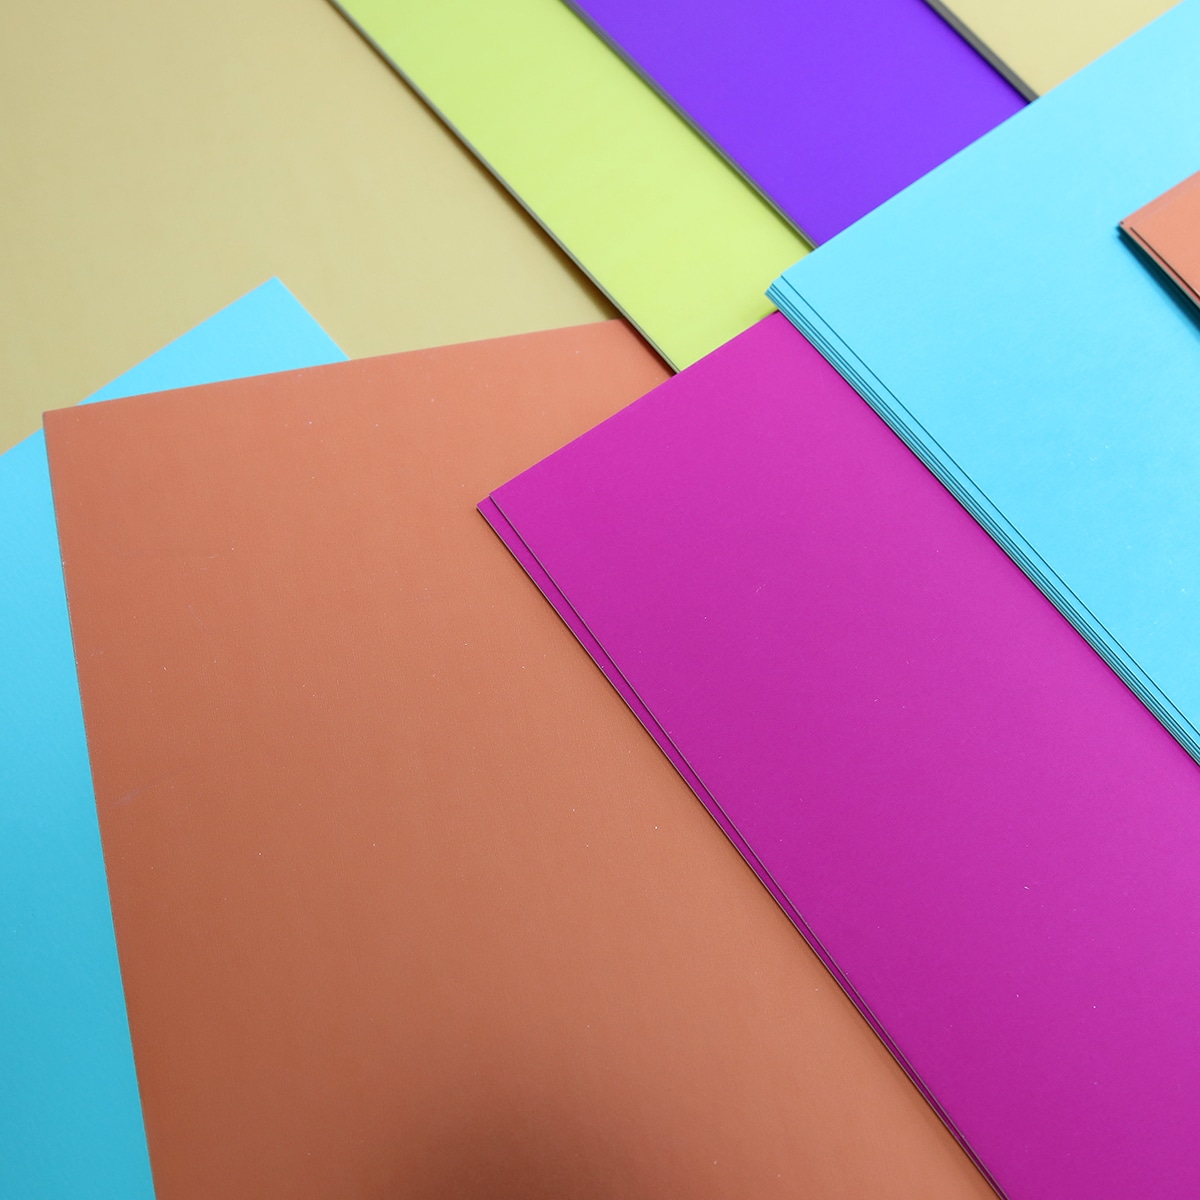 A pile of colored paper on a flat surface.